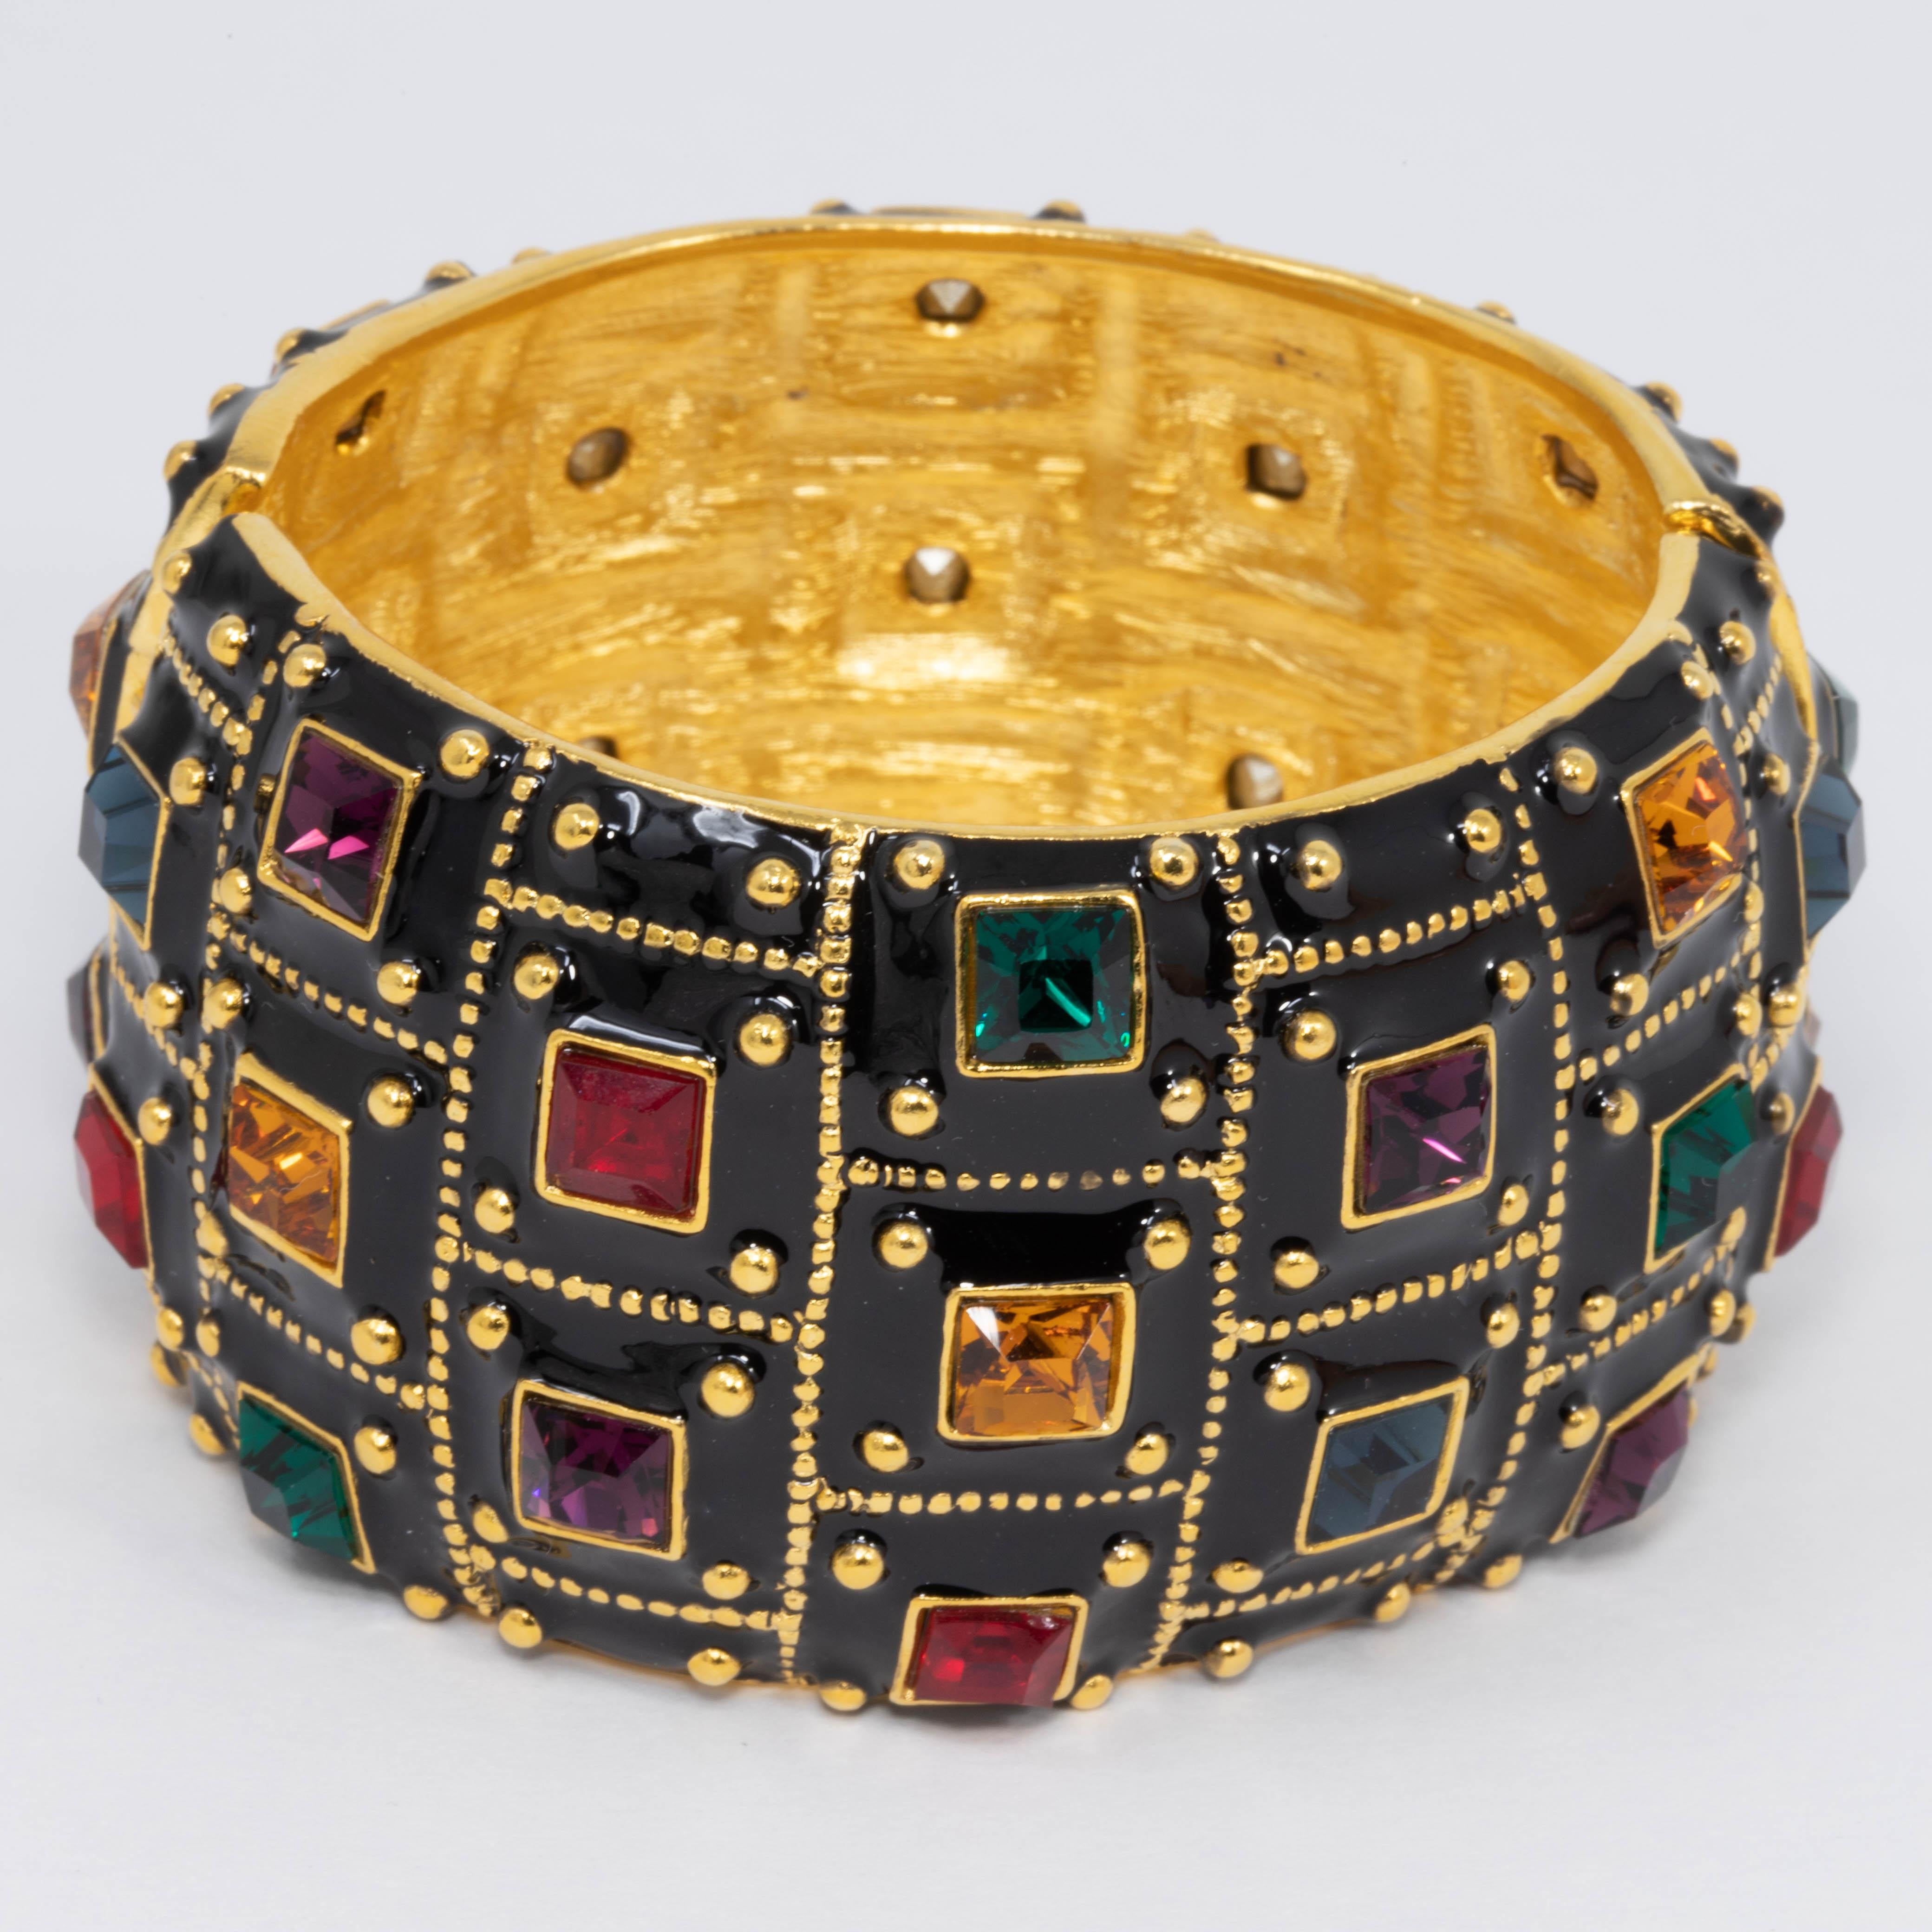 Exquisite jeweled bracelet by Kenneth Jay Lane. This gold-plated cuff featured painted black enamel, decorated with geometrical gold accents and colorful ruby, amethyst, amber, and emerald crystals.

Hinged bangle with magnetic closure.

Hallmarks: